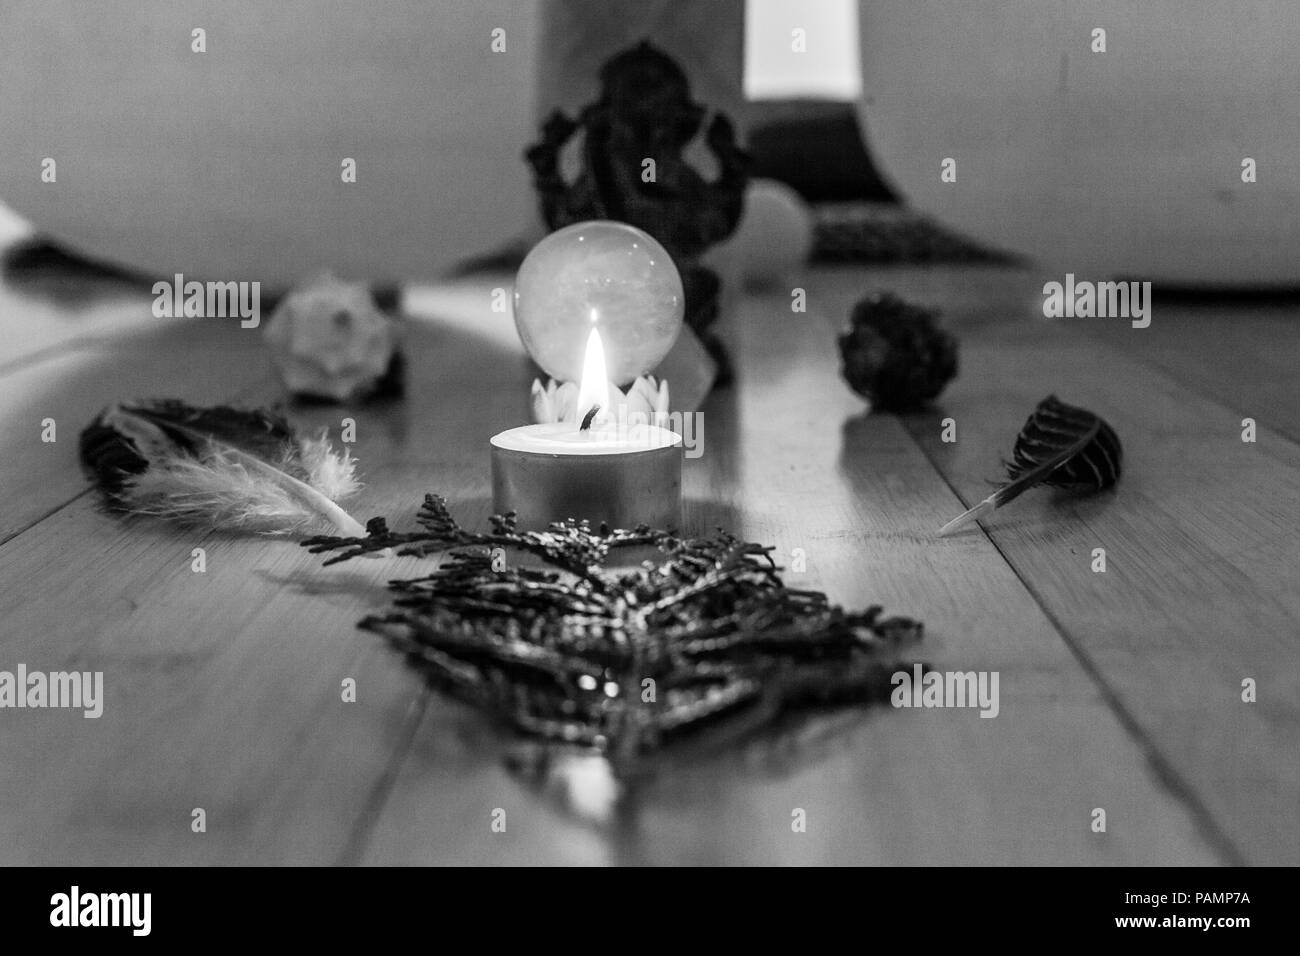 Candle On Ground High Resolution Stock Photography and Images - Alamy